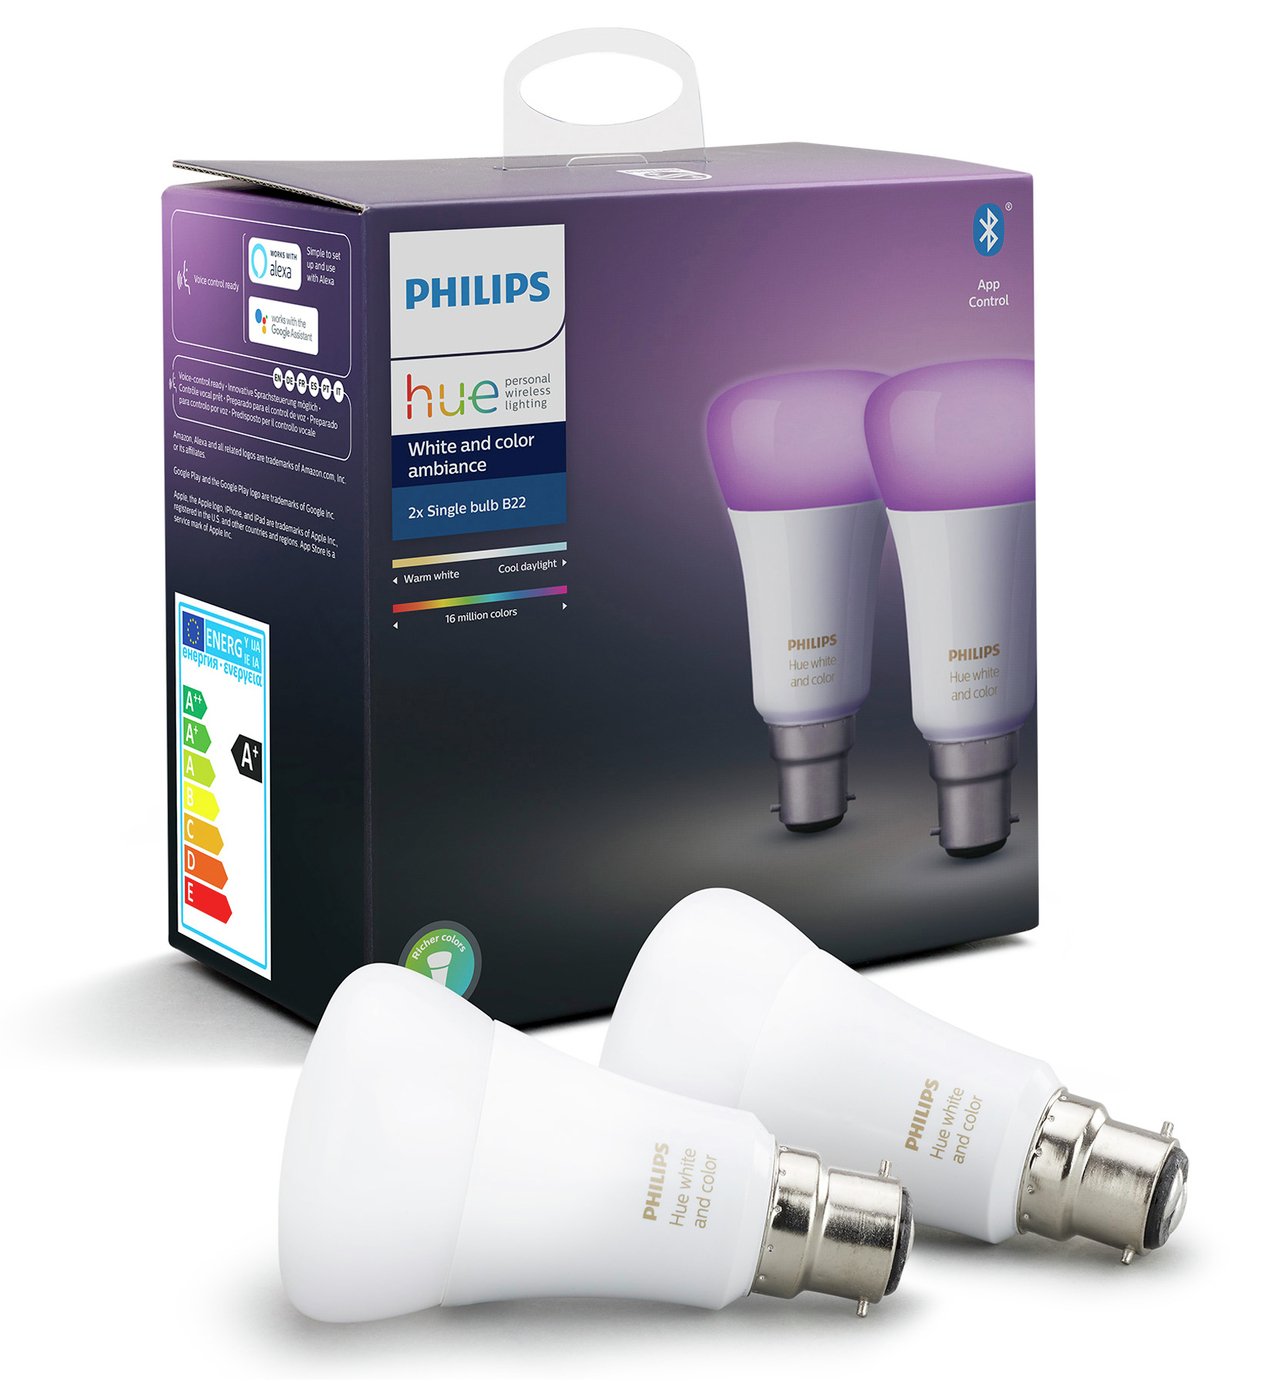 Philips Hue White and Colour B22 Bulb Review